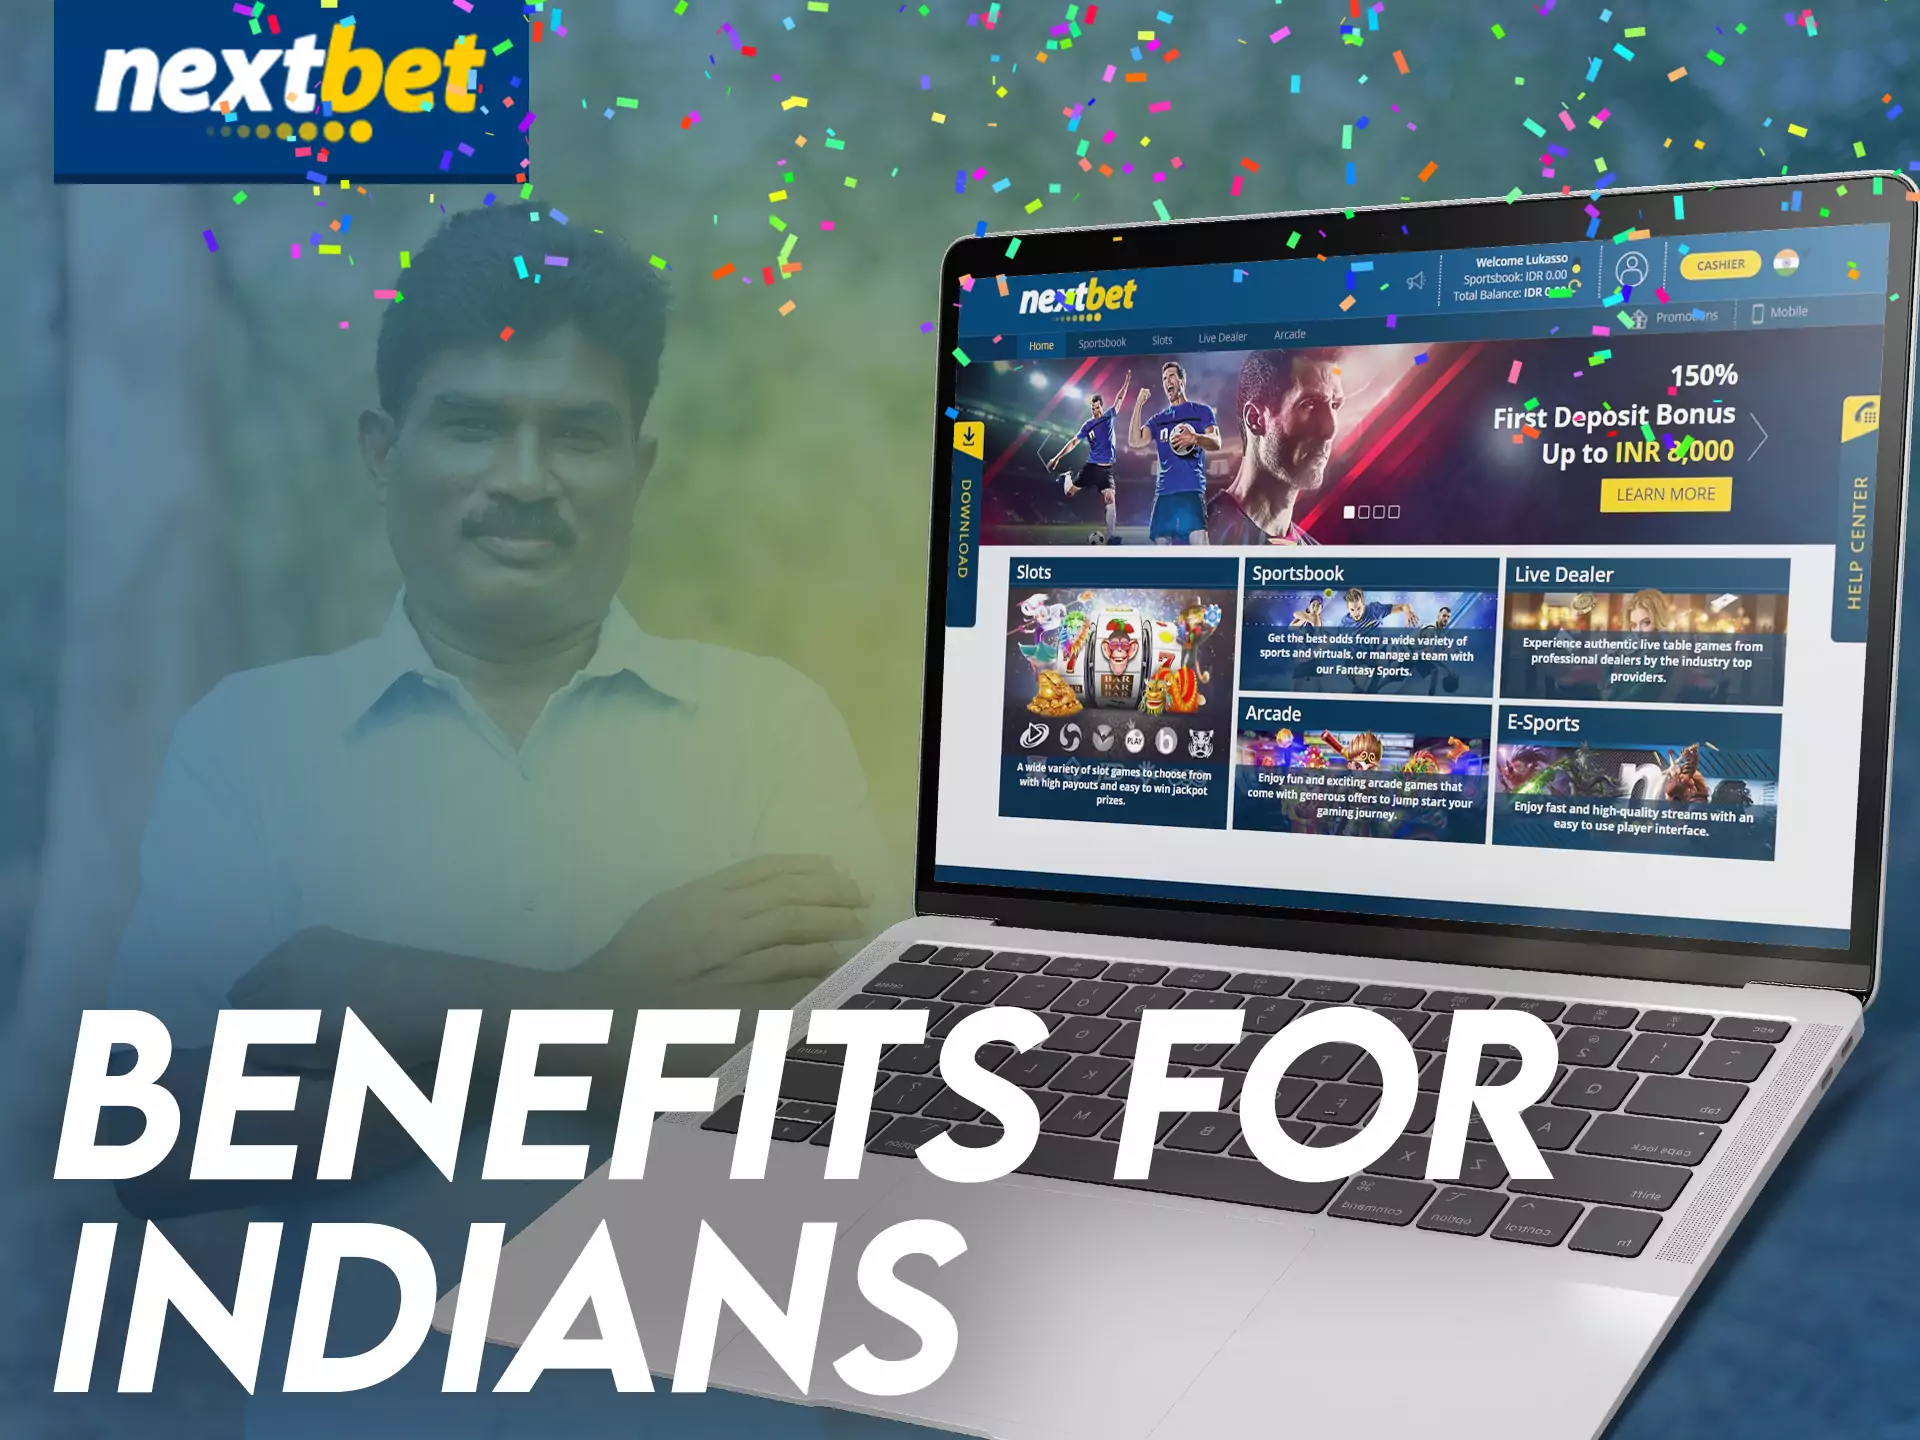 Nextbet offers various bonuses and benefits to players from India.